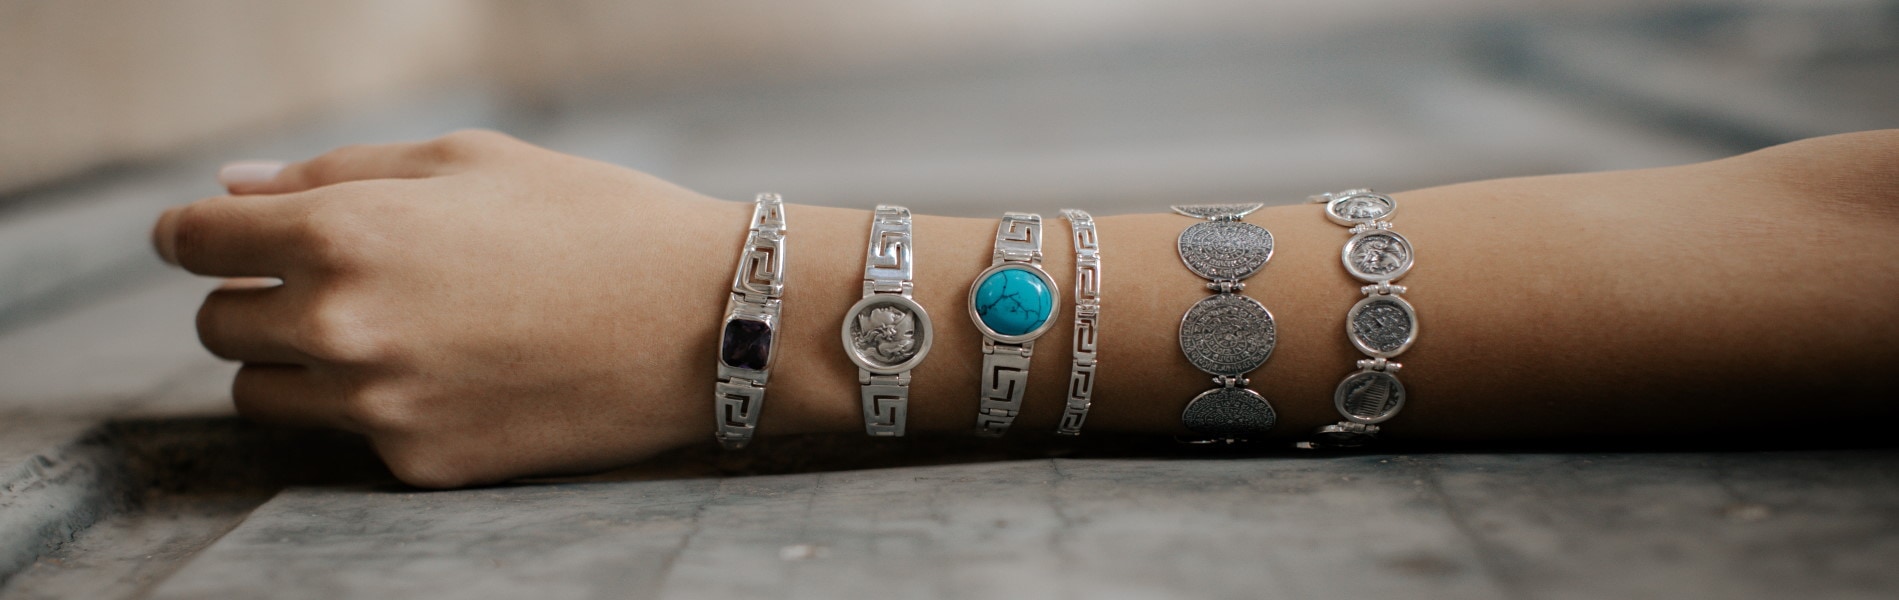 Rings and bracelets